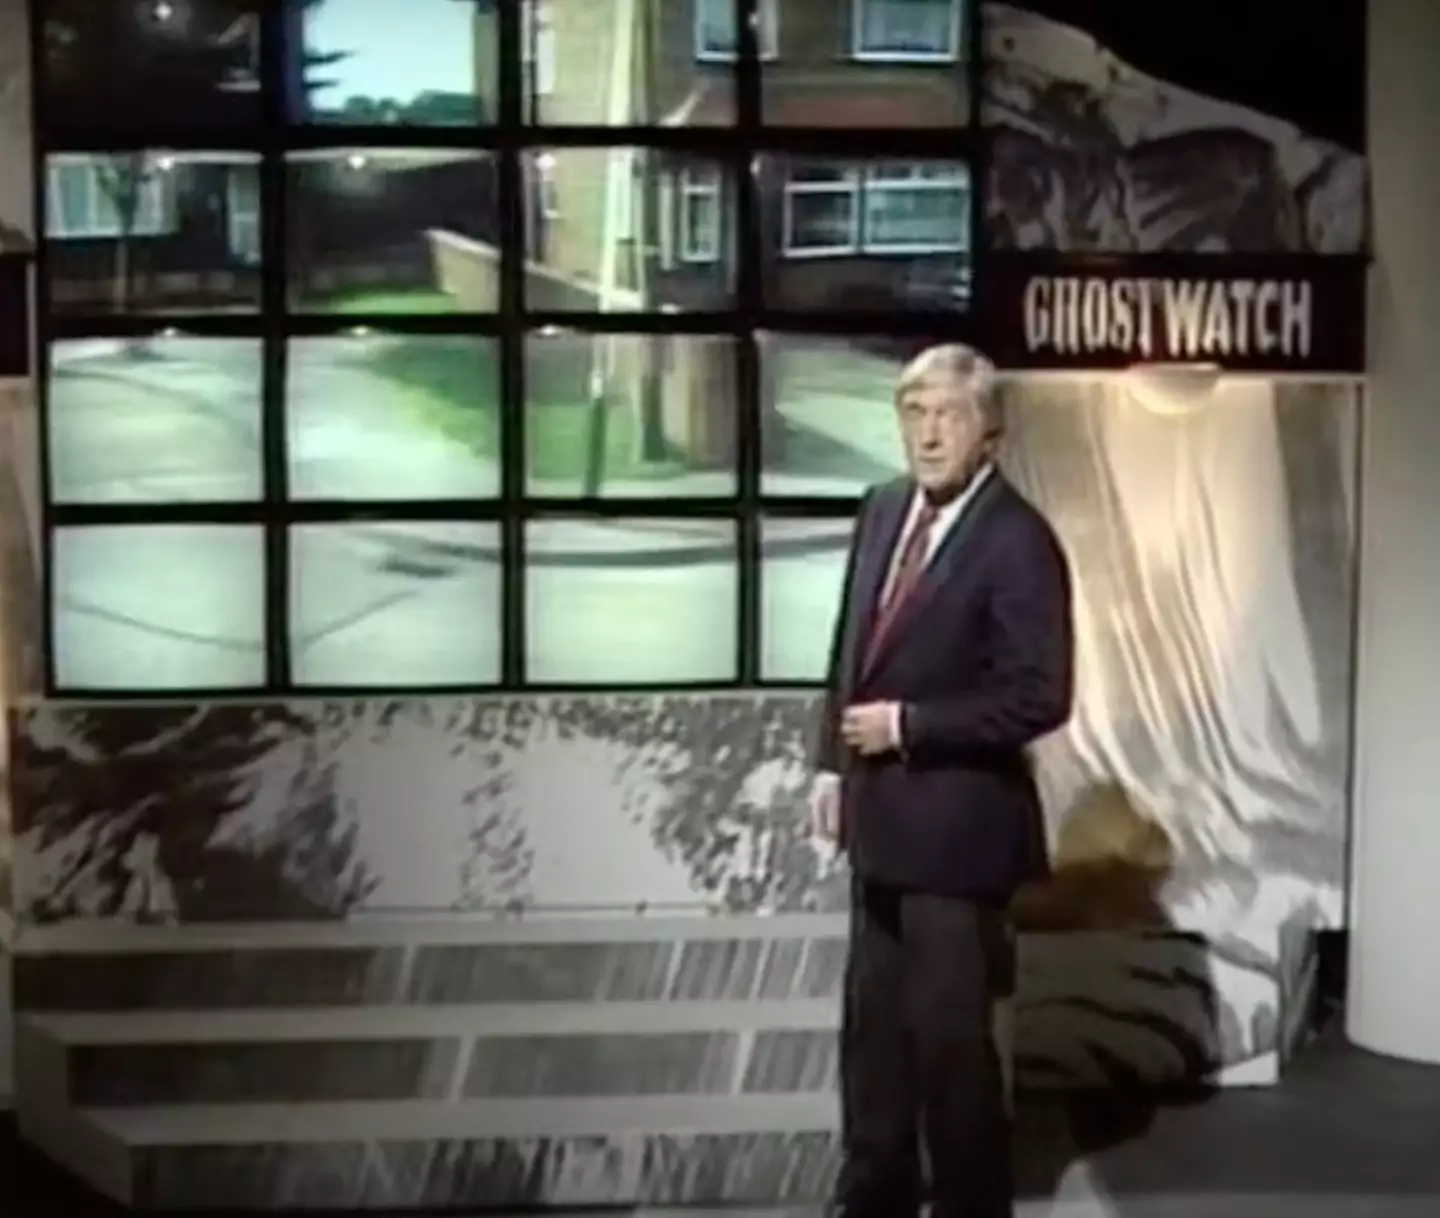 Clips of Ghostwatch have been doing the rounds on social media.